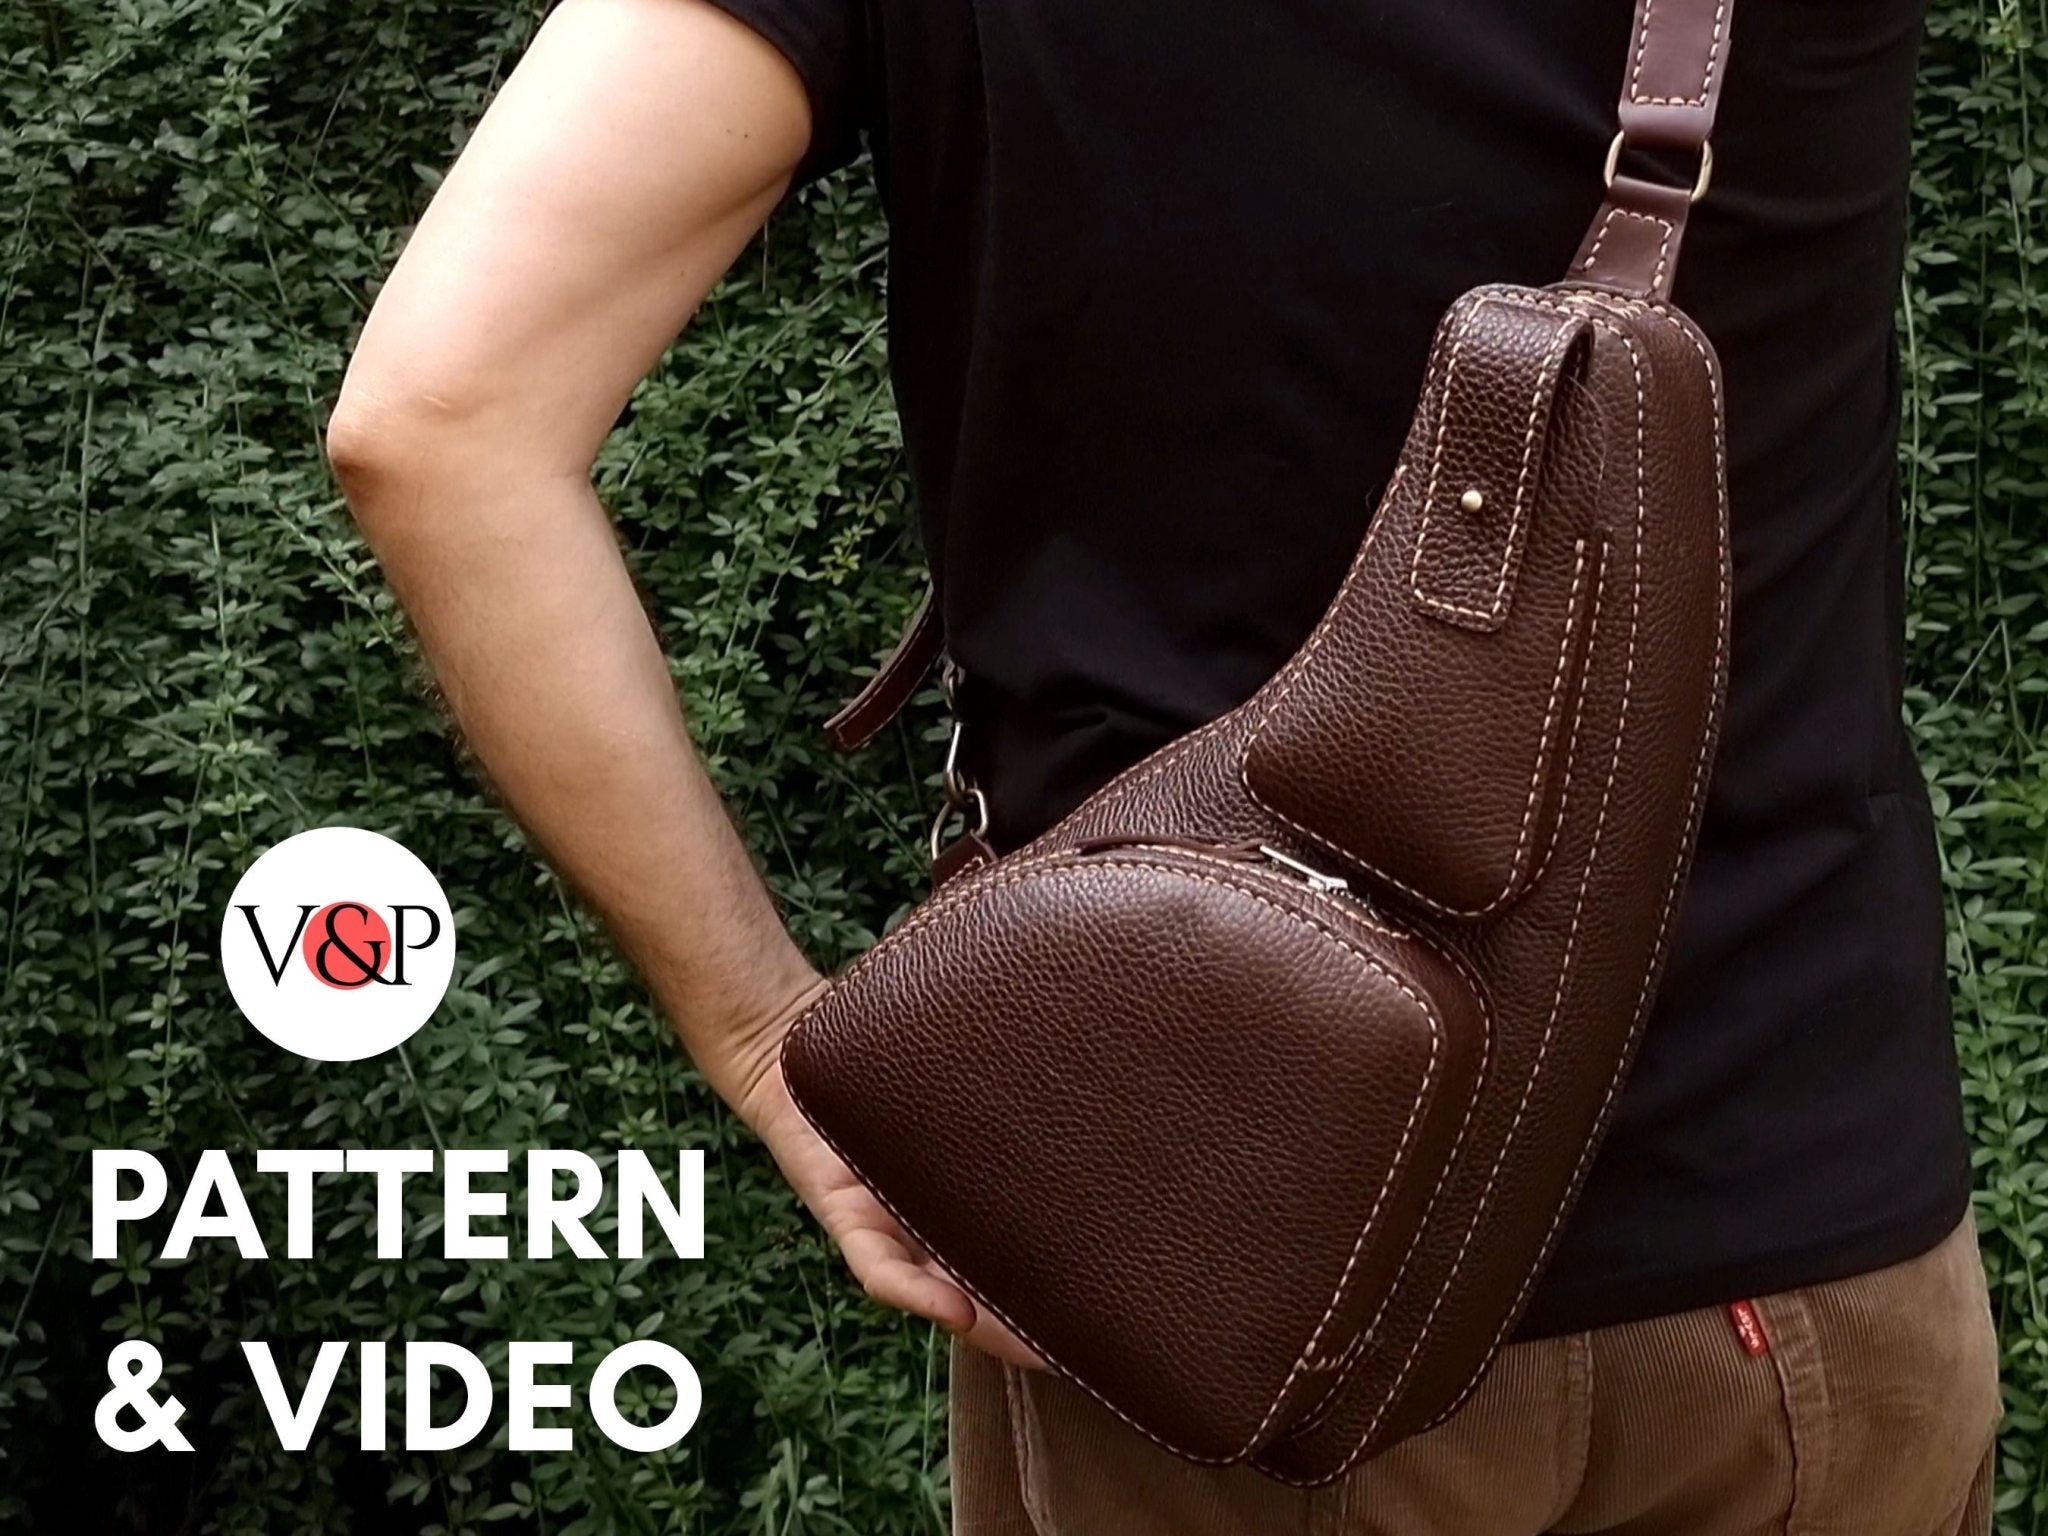 Video: The Right Way to Wear a Sling Pack